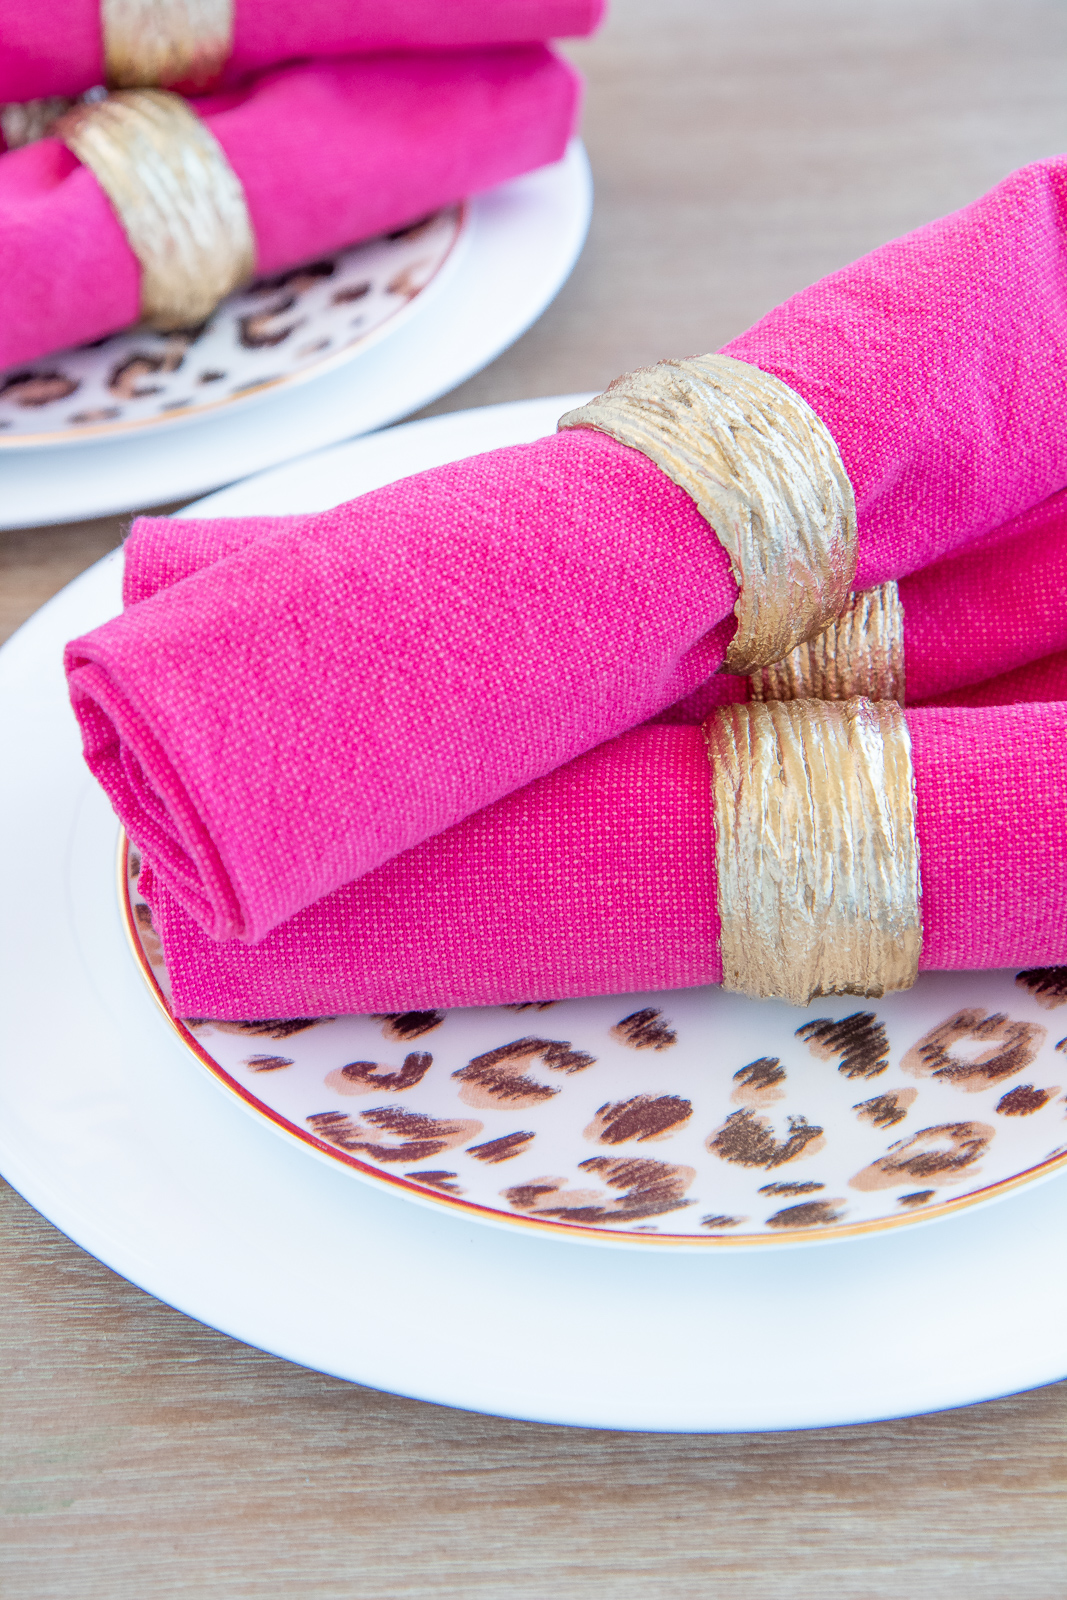 How to make napkin rings out of a toilet paper rolls, twine & glue